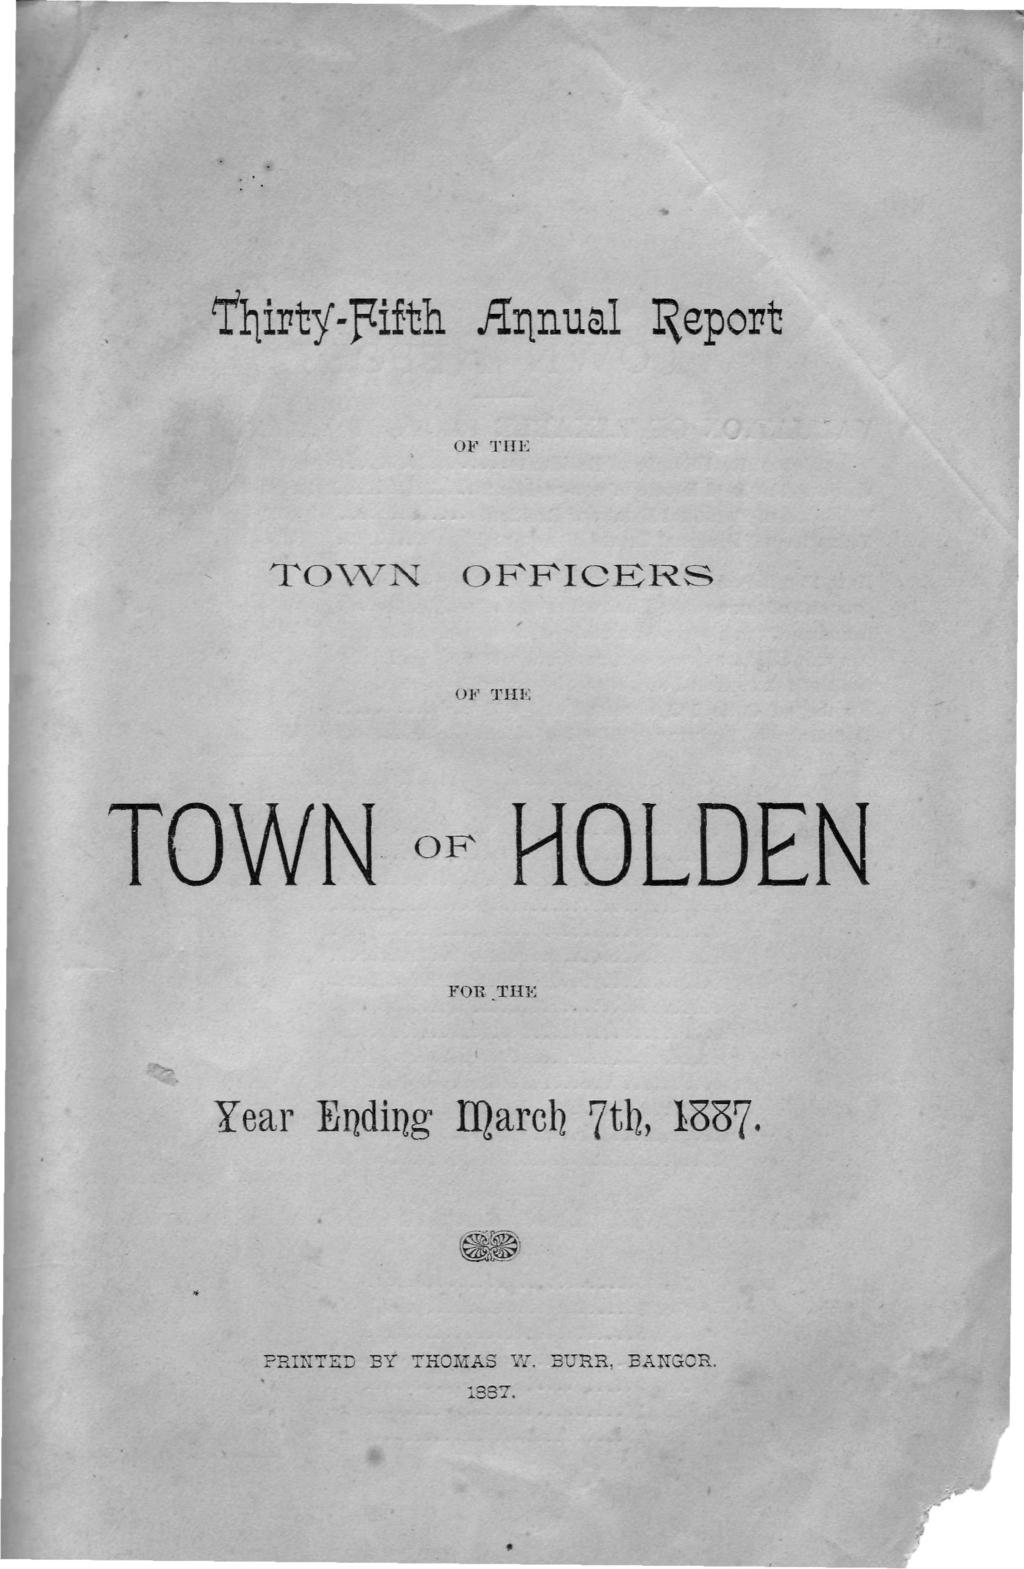 Thirty-Fifth Annual Report OF THE TOWN OFFICERS OF THE TOWNofHOLDEN